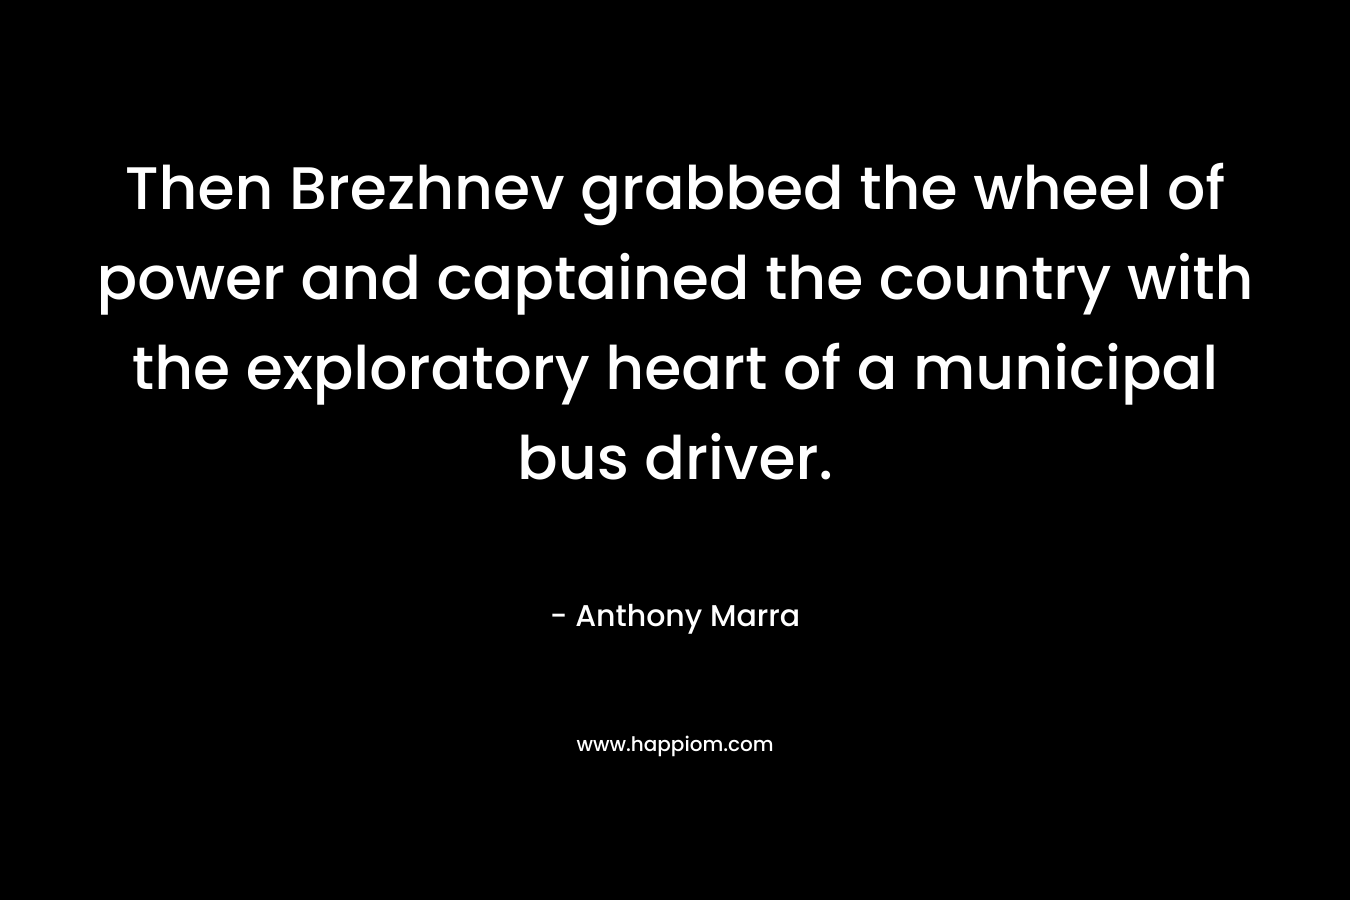 Then Brezhnev grabbed the wheel of power and captained the country with the exploratory heart of a municipal bus driver. – Anthony Marra